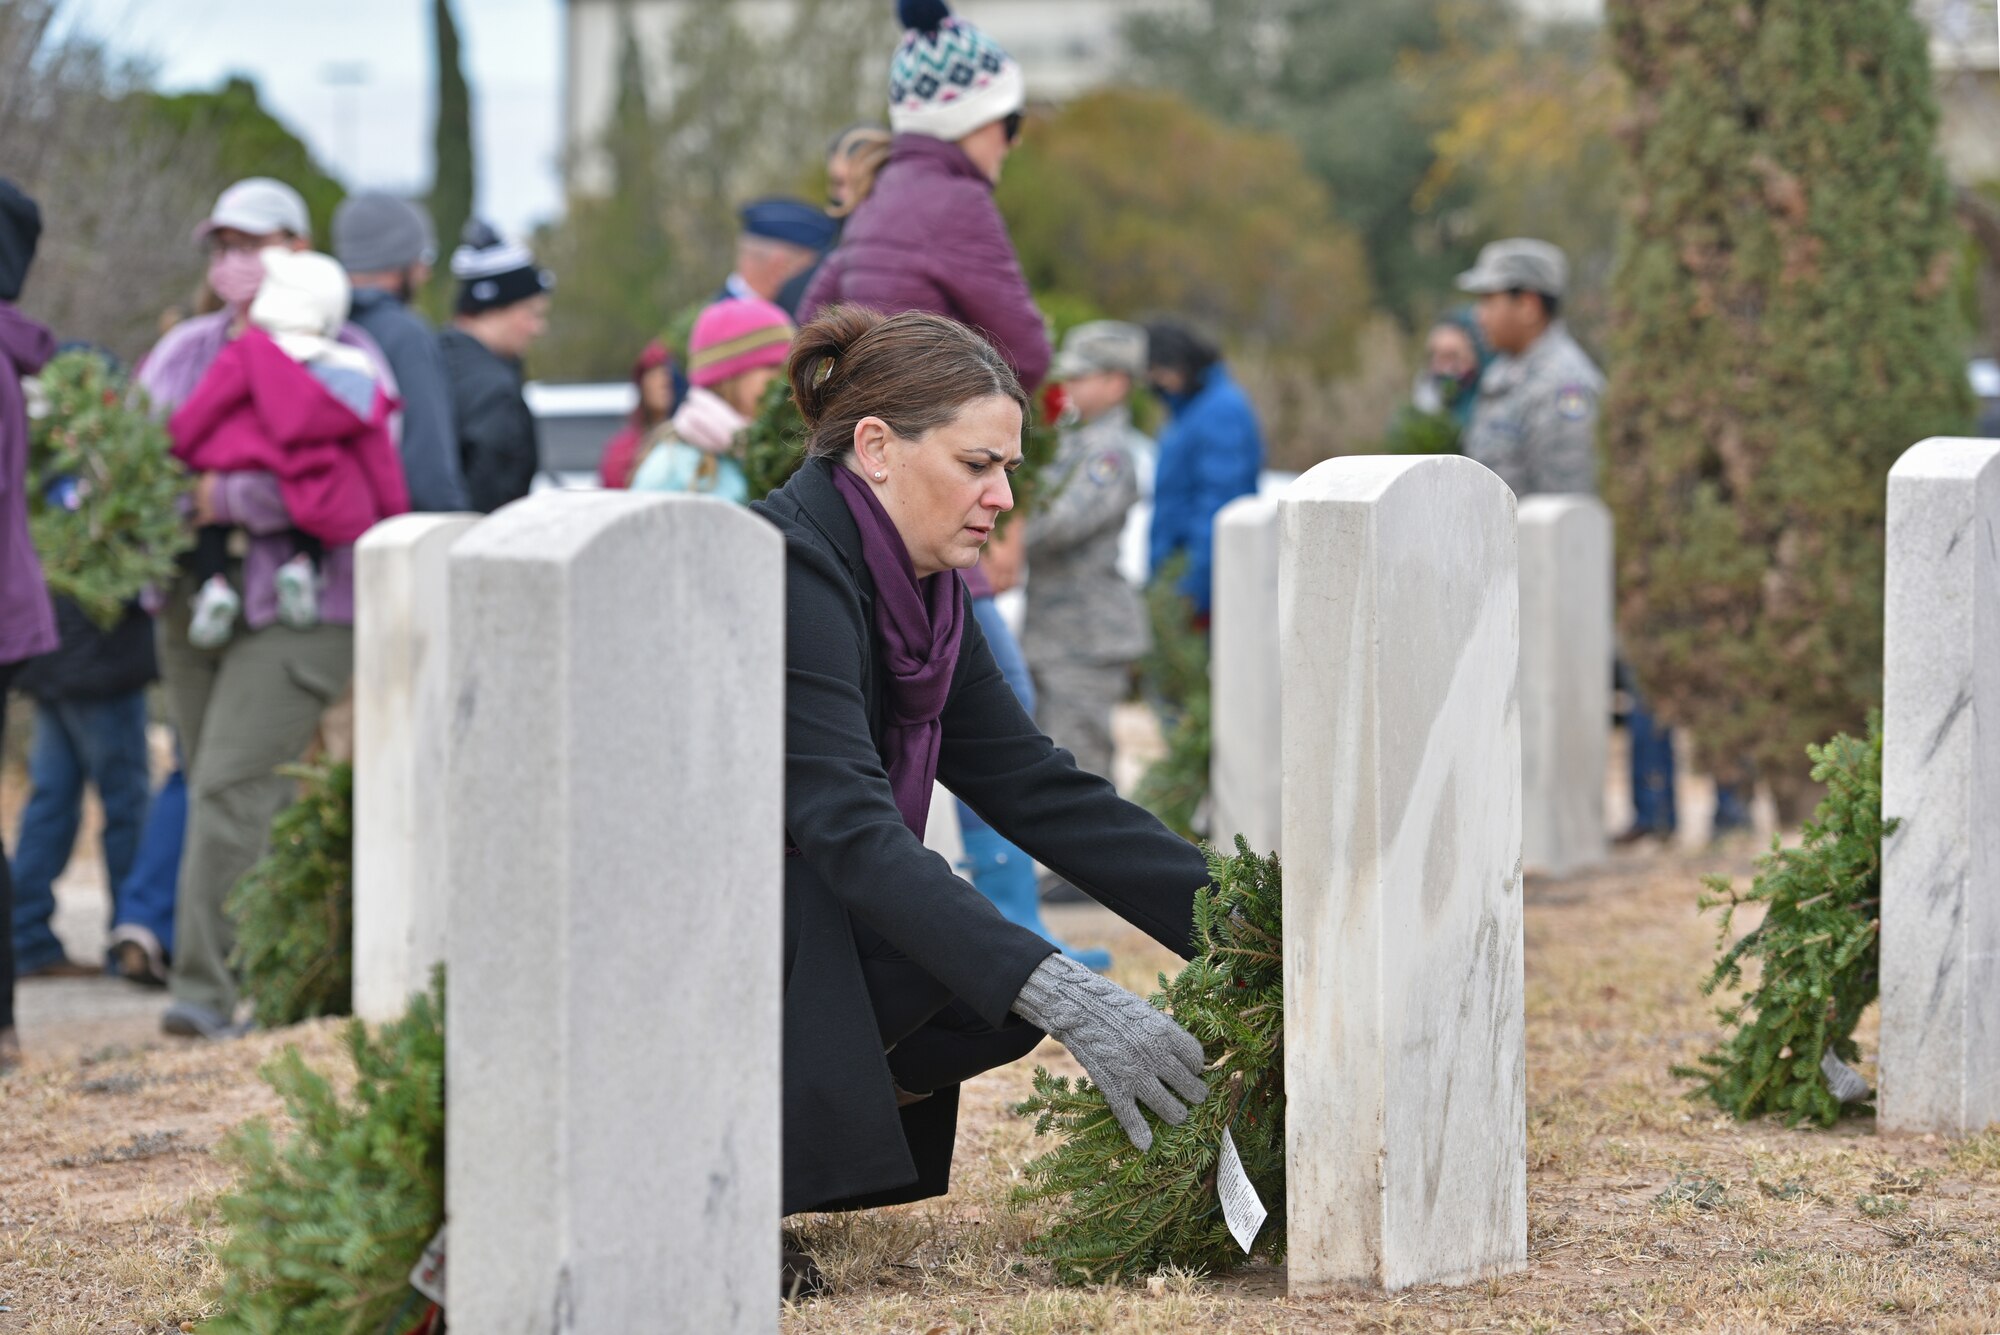 Katie Reilman, 17th Training Wing command team spouse, places a wreath during the Wreaths Across America ceremony at Belvedere Memorial Park Cemetery in San Angelo, Texas, Dec. 18, 2021. Following the ceremony, over 300 wreaths were placed across Belvedere Memorial Park Cemetery. (U.S. Air Force photo by Senior Airman Ashley Thrash)